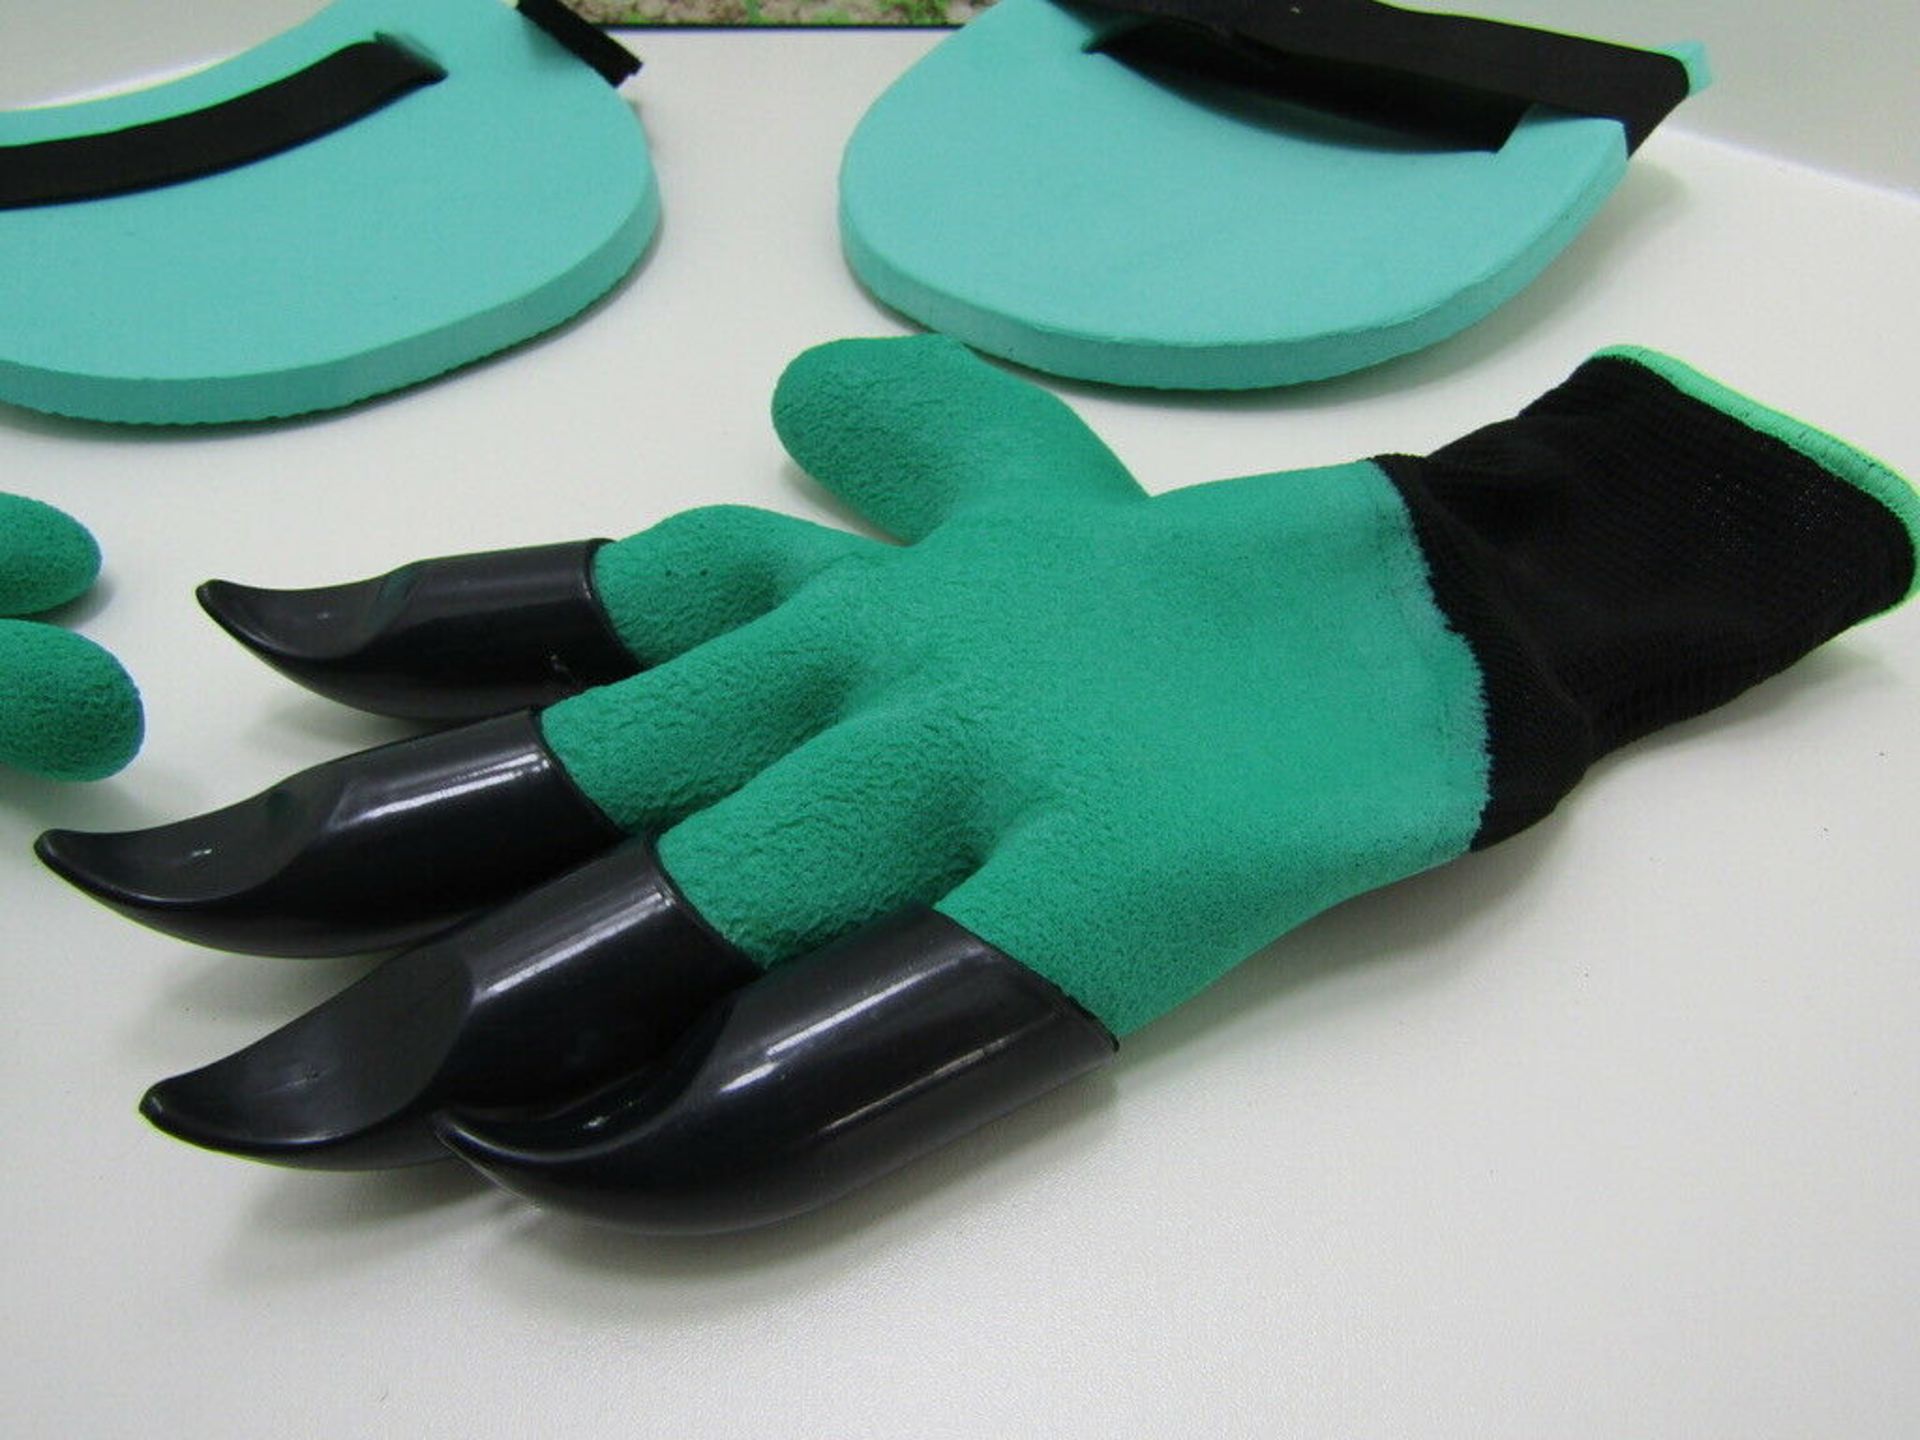 4x Digging Gloves. Gardeners Claw Finger Gloves and Knee Pad Set. - Image 3 of 8